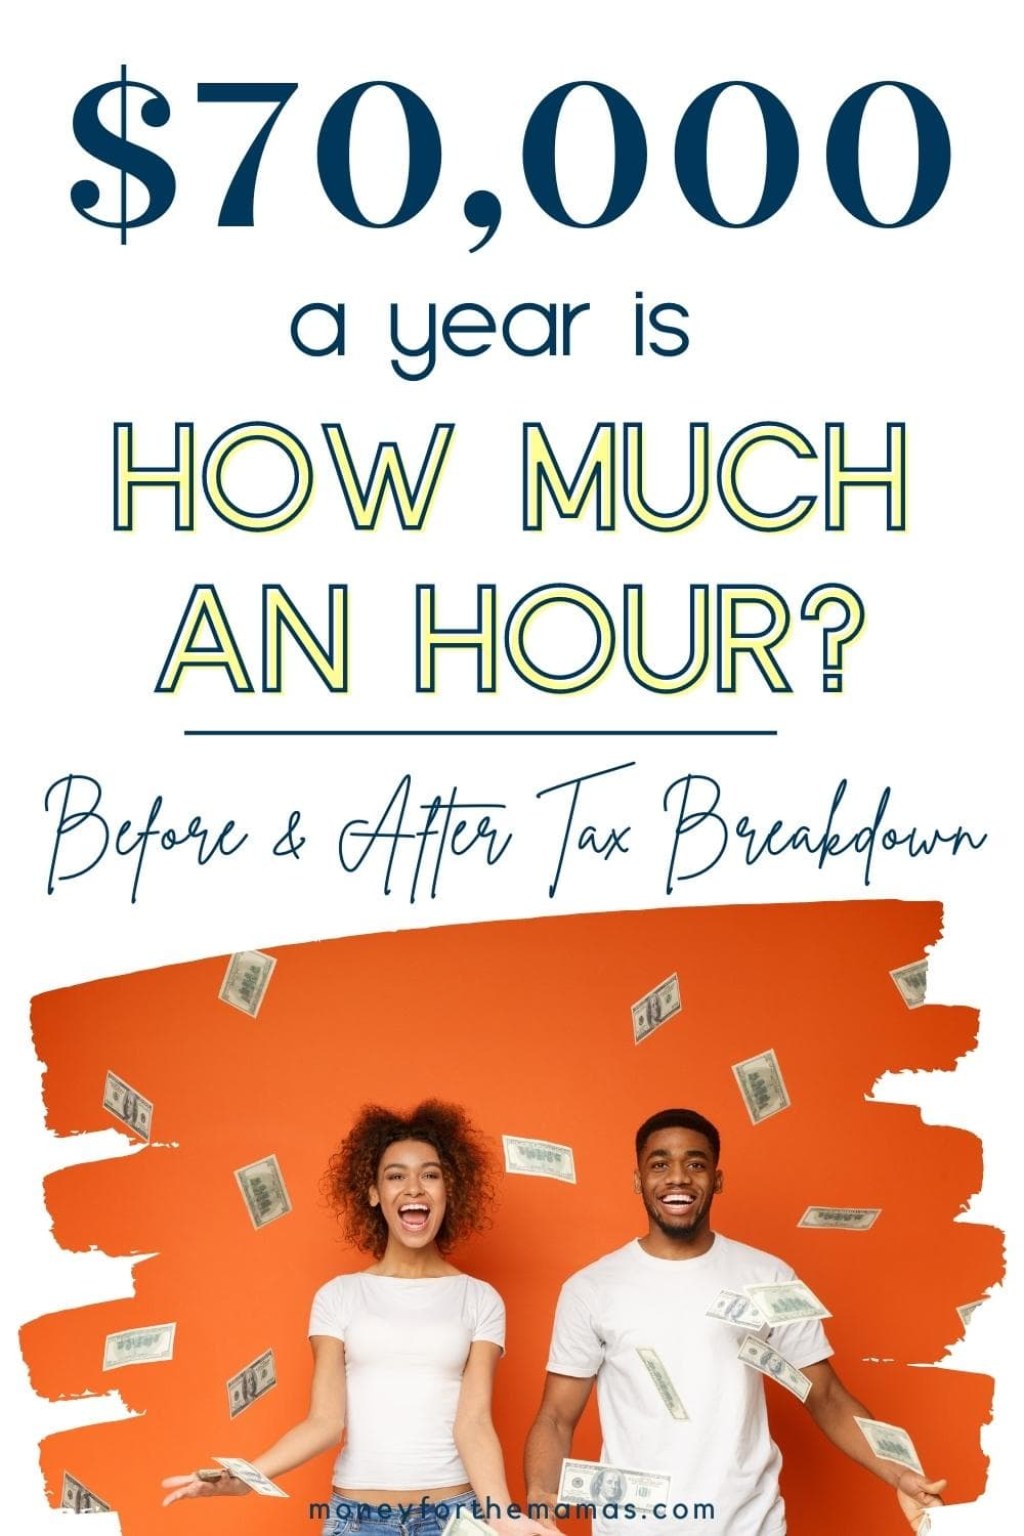 k a year is how much an hour before amp after tax breakdown 0